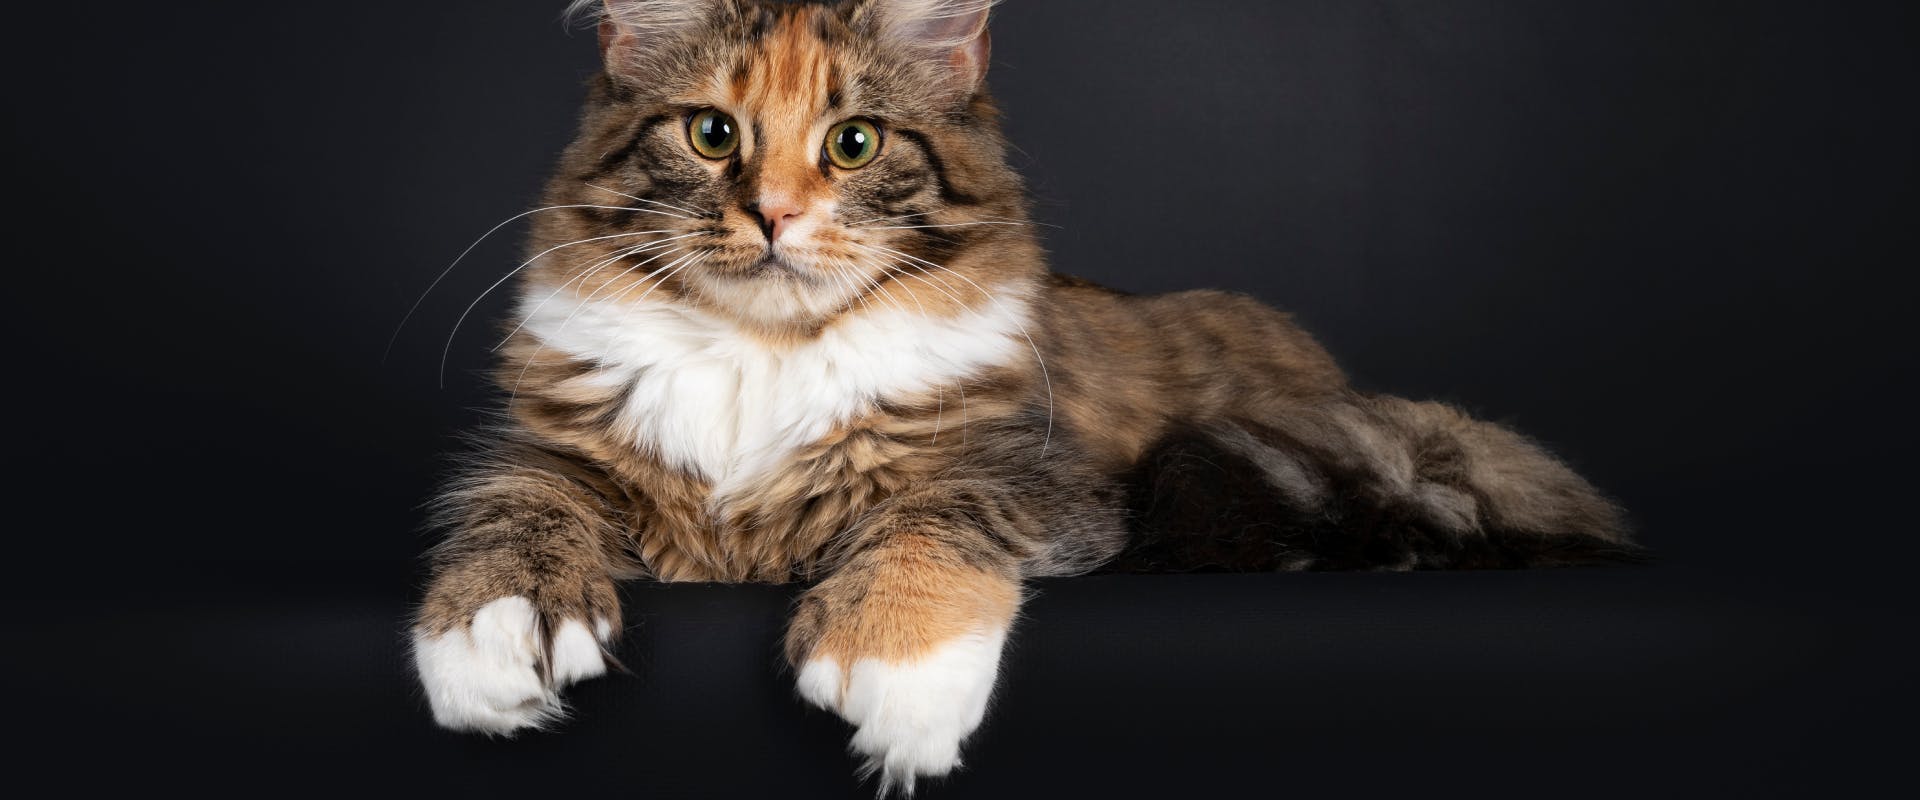 calico maine coon cat with polydactyl paws